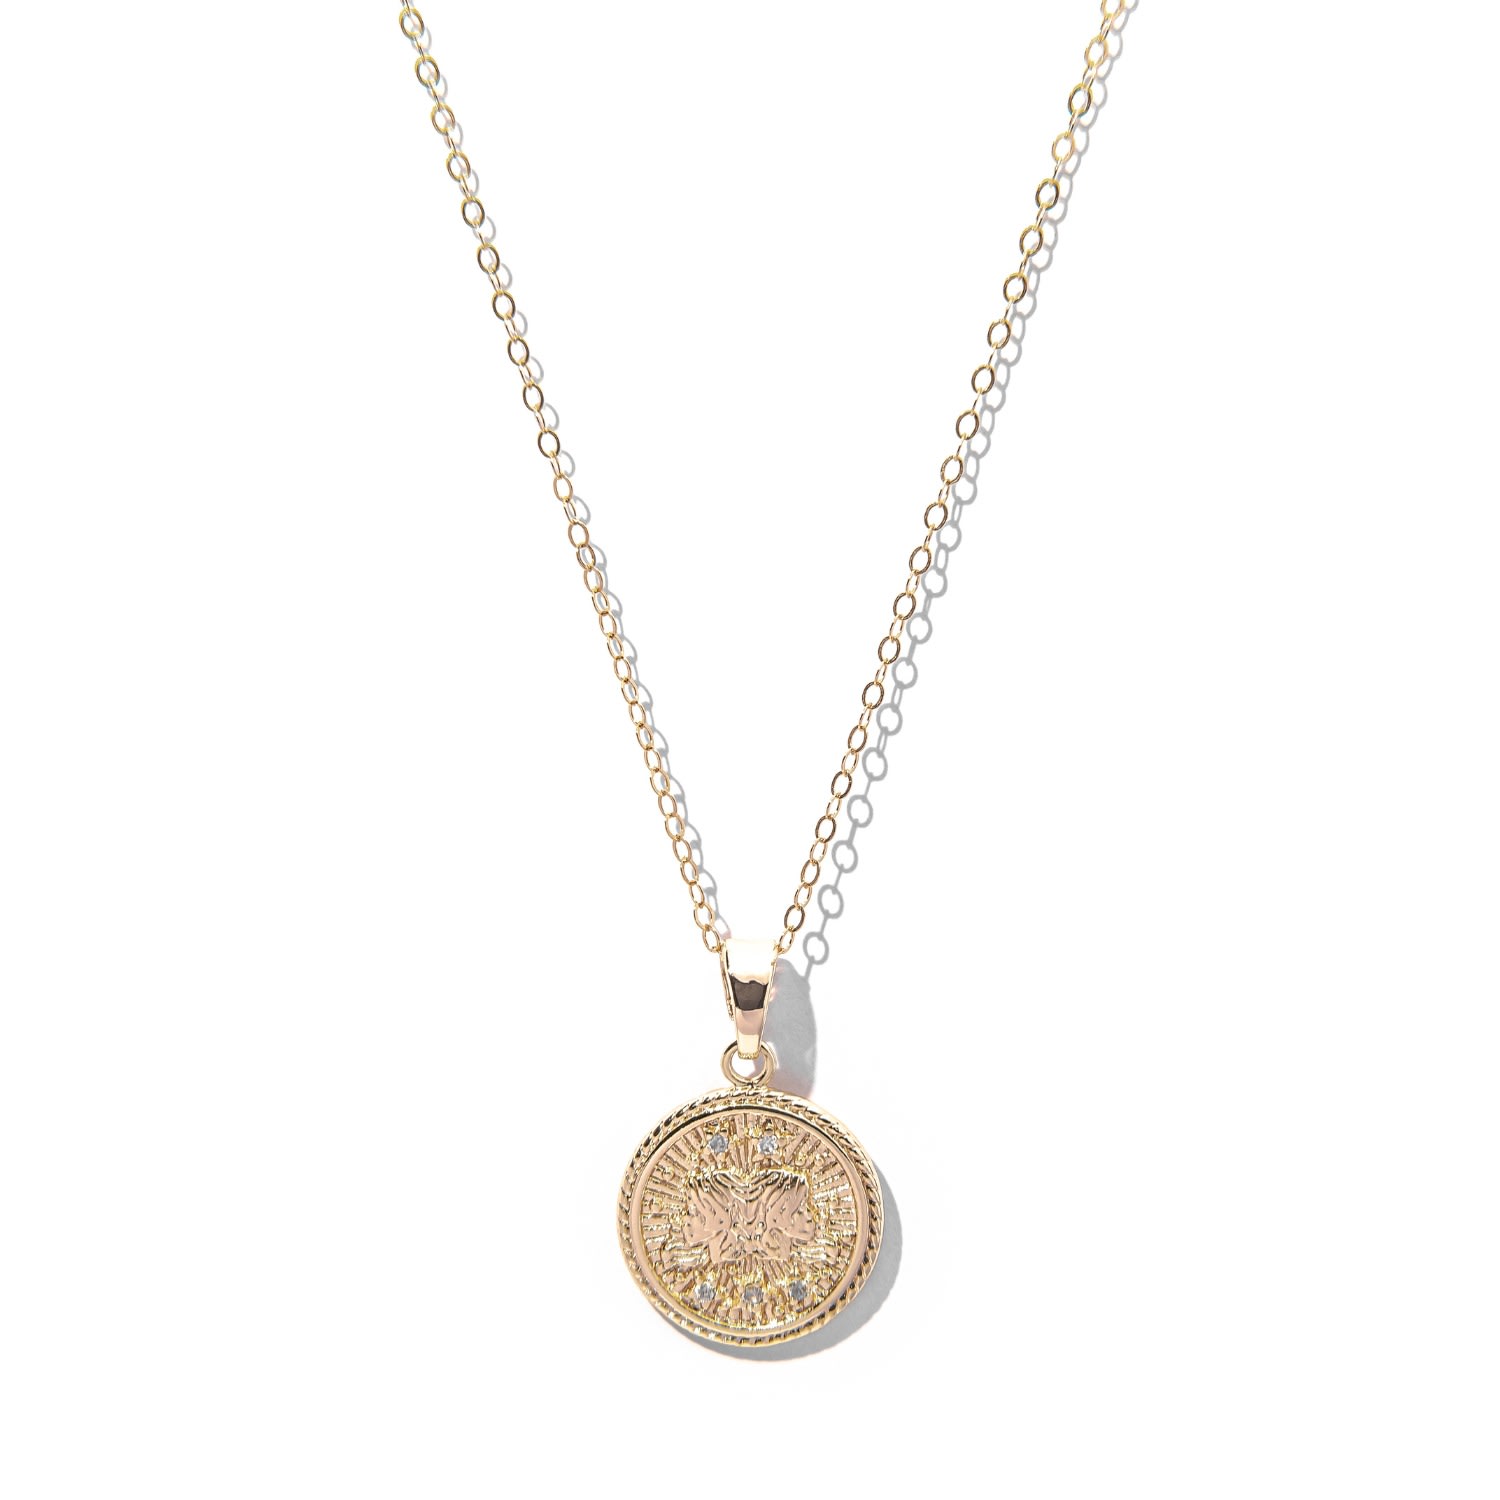 Women's Gemini Zodiac Medallion Pendant Gold Filled Necklace The Essential Jewels